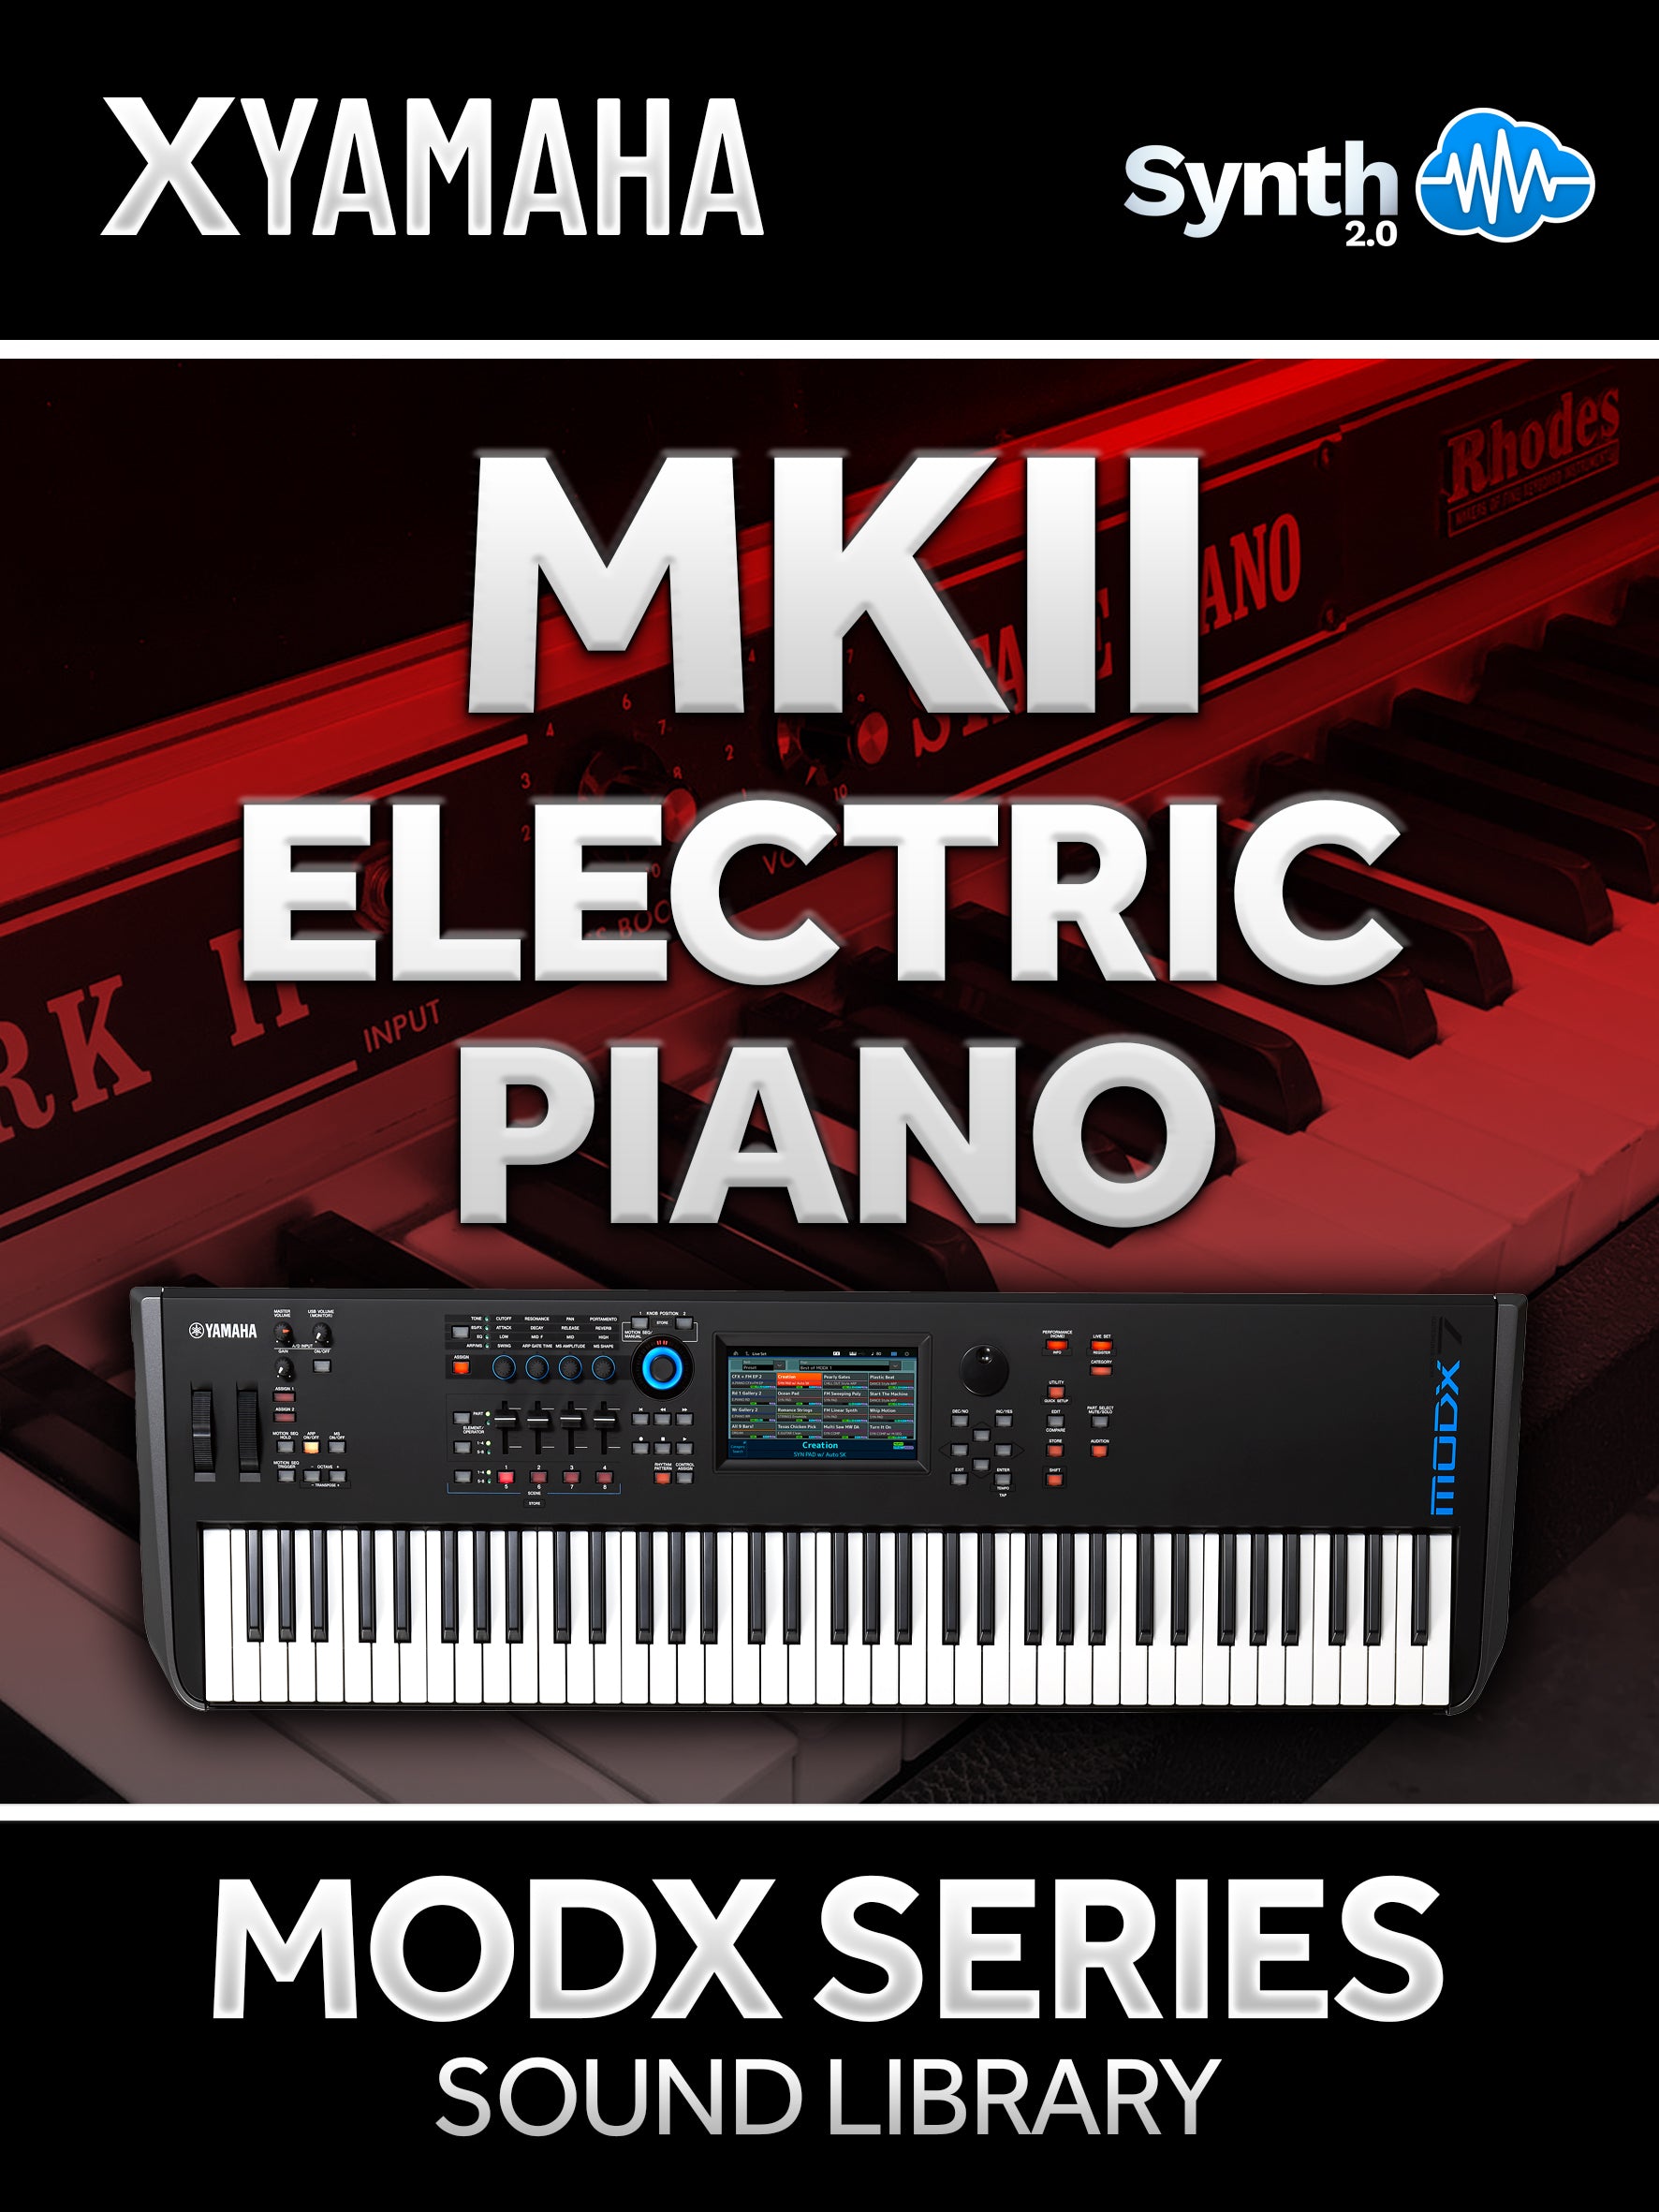 SCL267 - MKII Electric Piano - Yamaha MODX / MODX+ ( 11 presets )